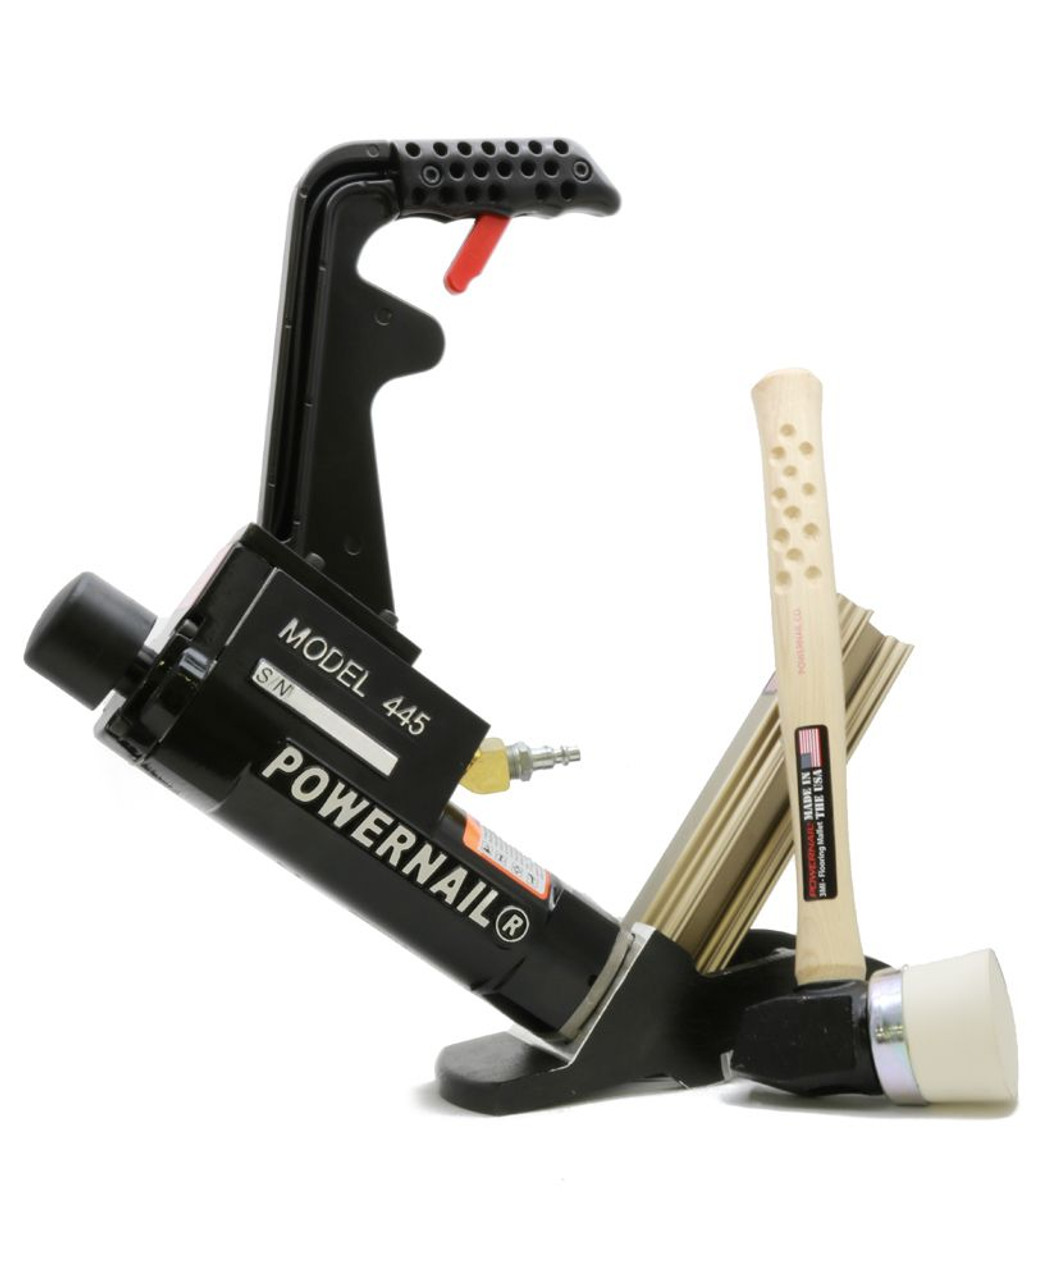 Powernail 445 Pneumatic Nailer Tongue and Groove- Long Handle, Short Channel